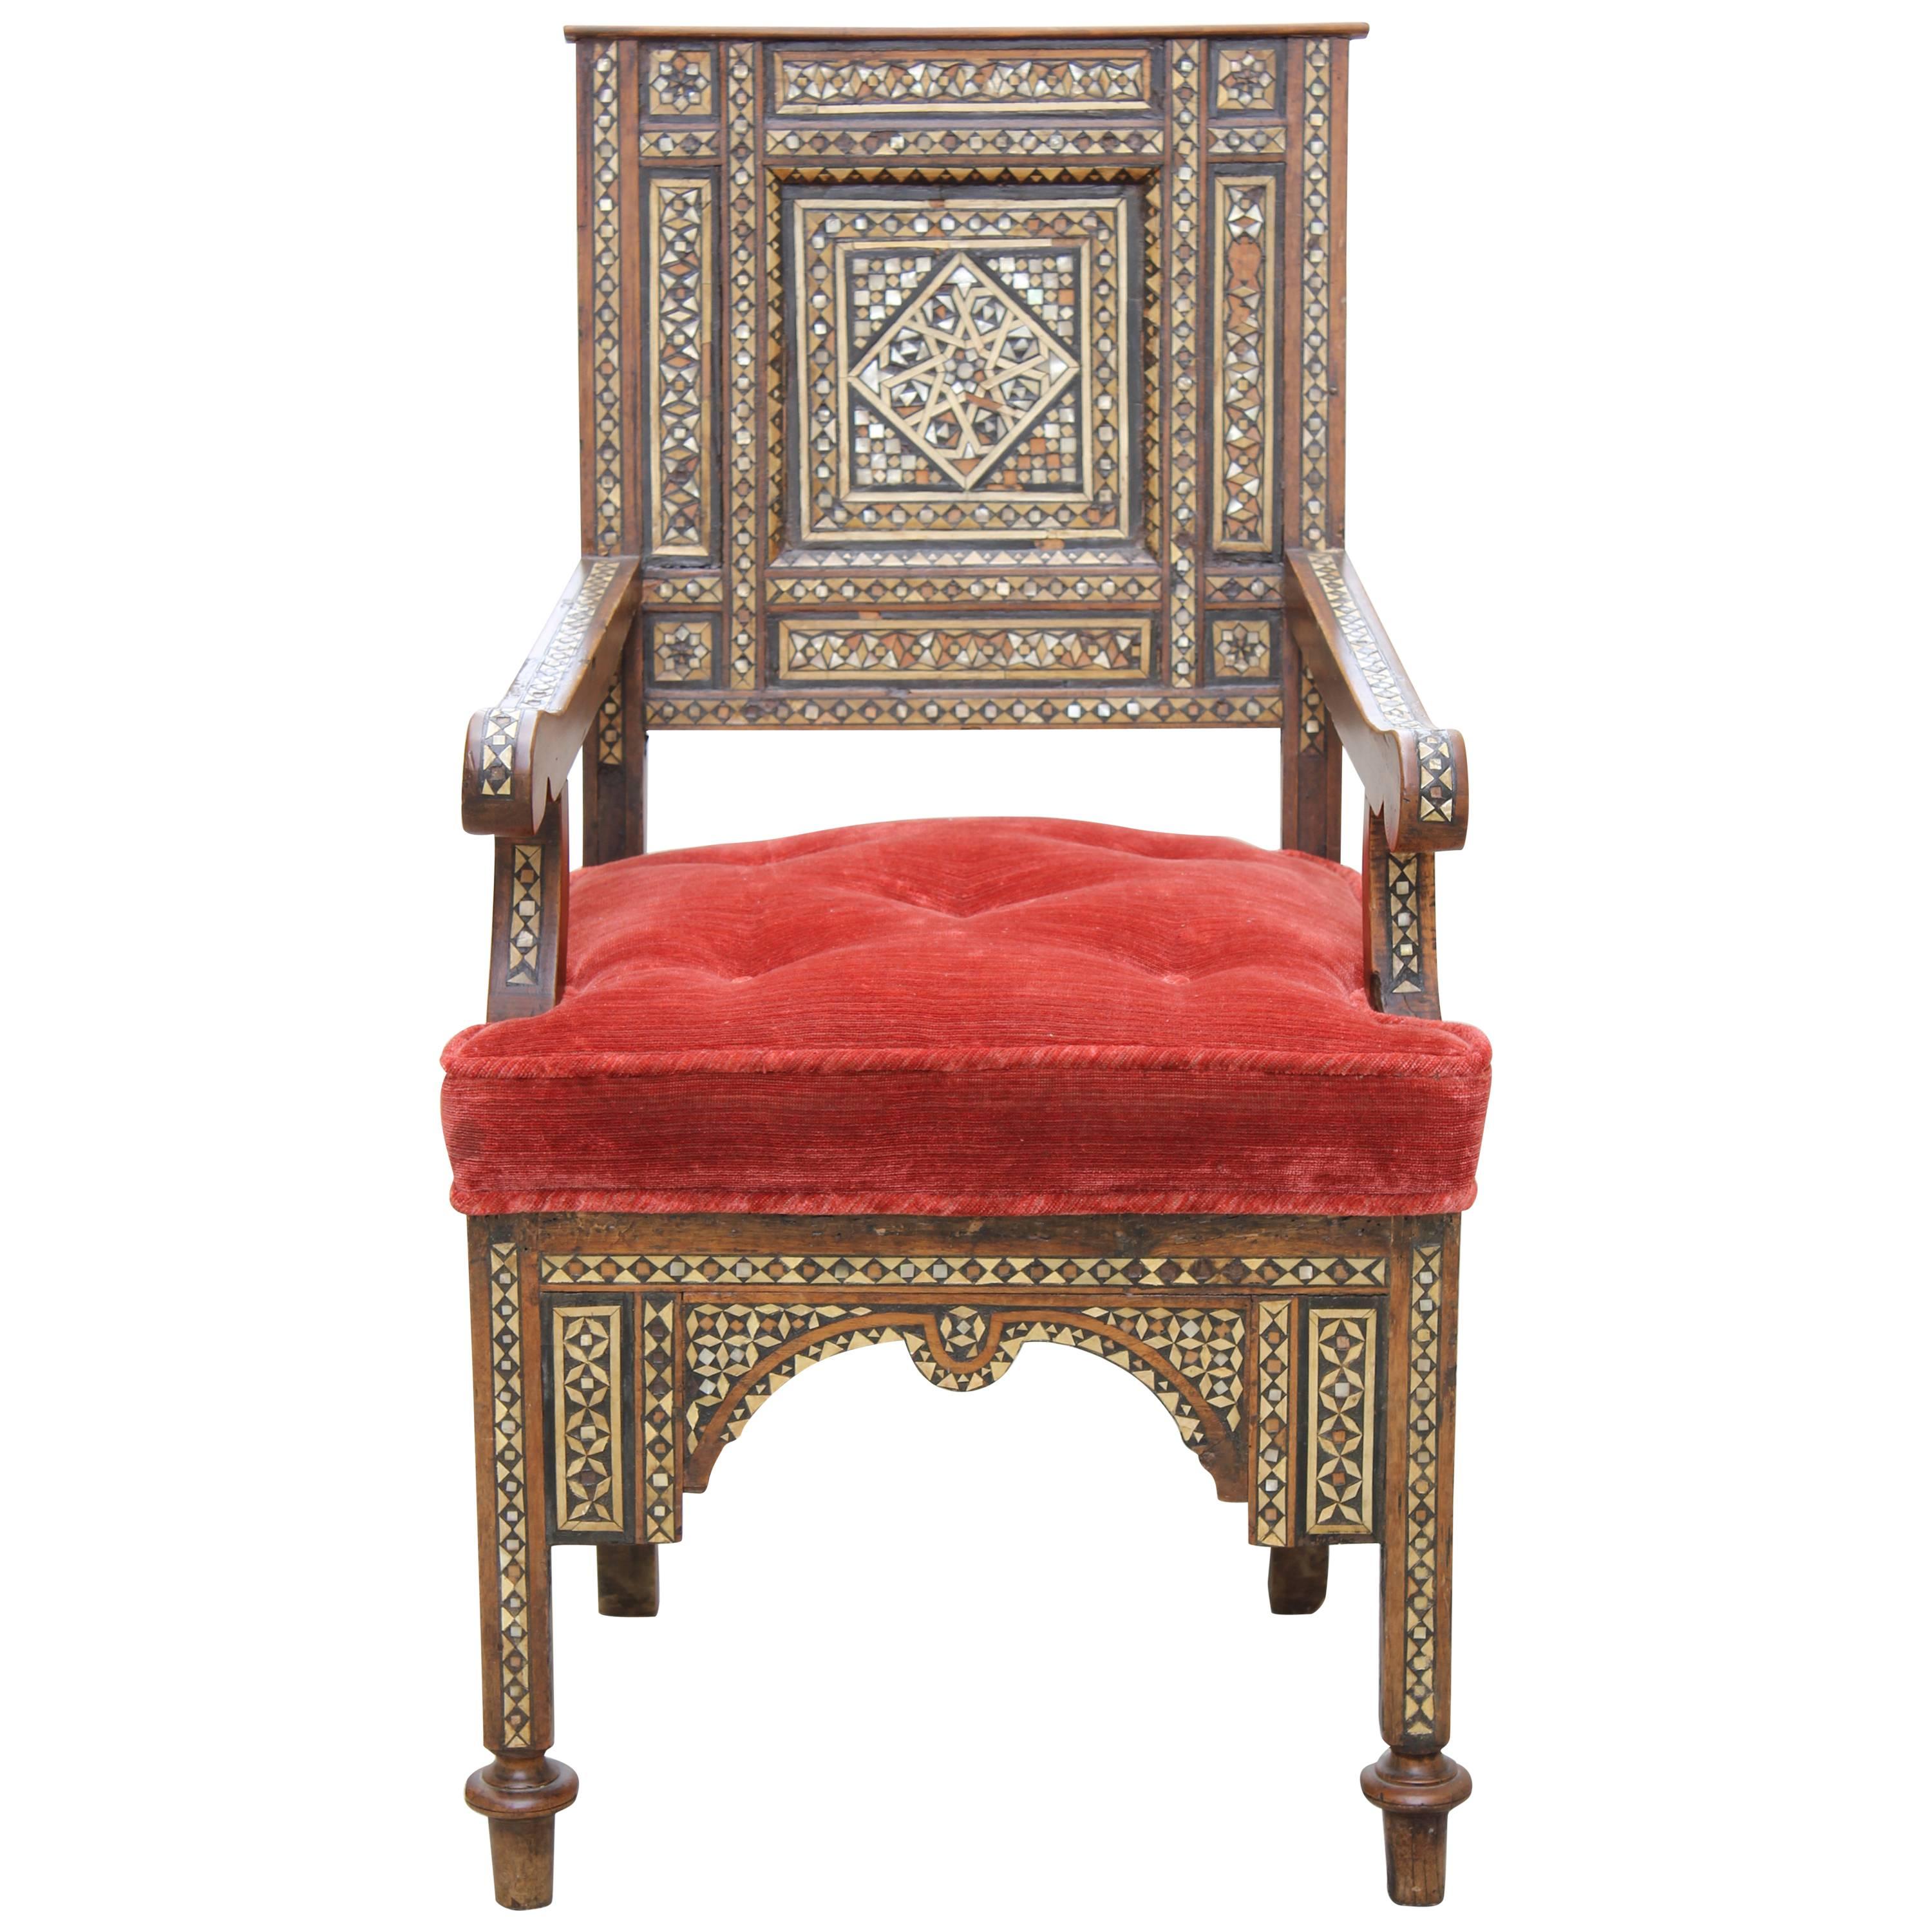 19th Century Syrian Mother-of-pearl Inlaid Armchair 